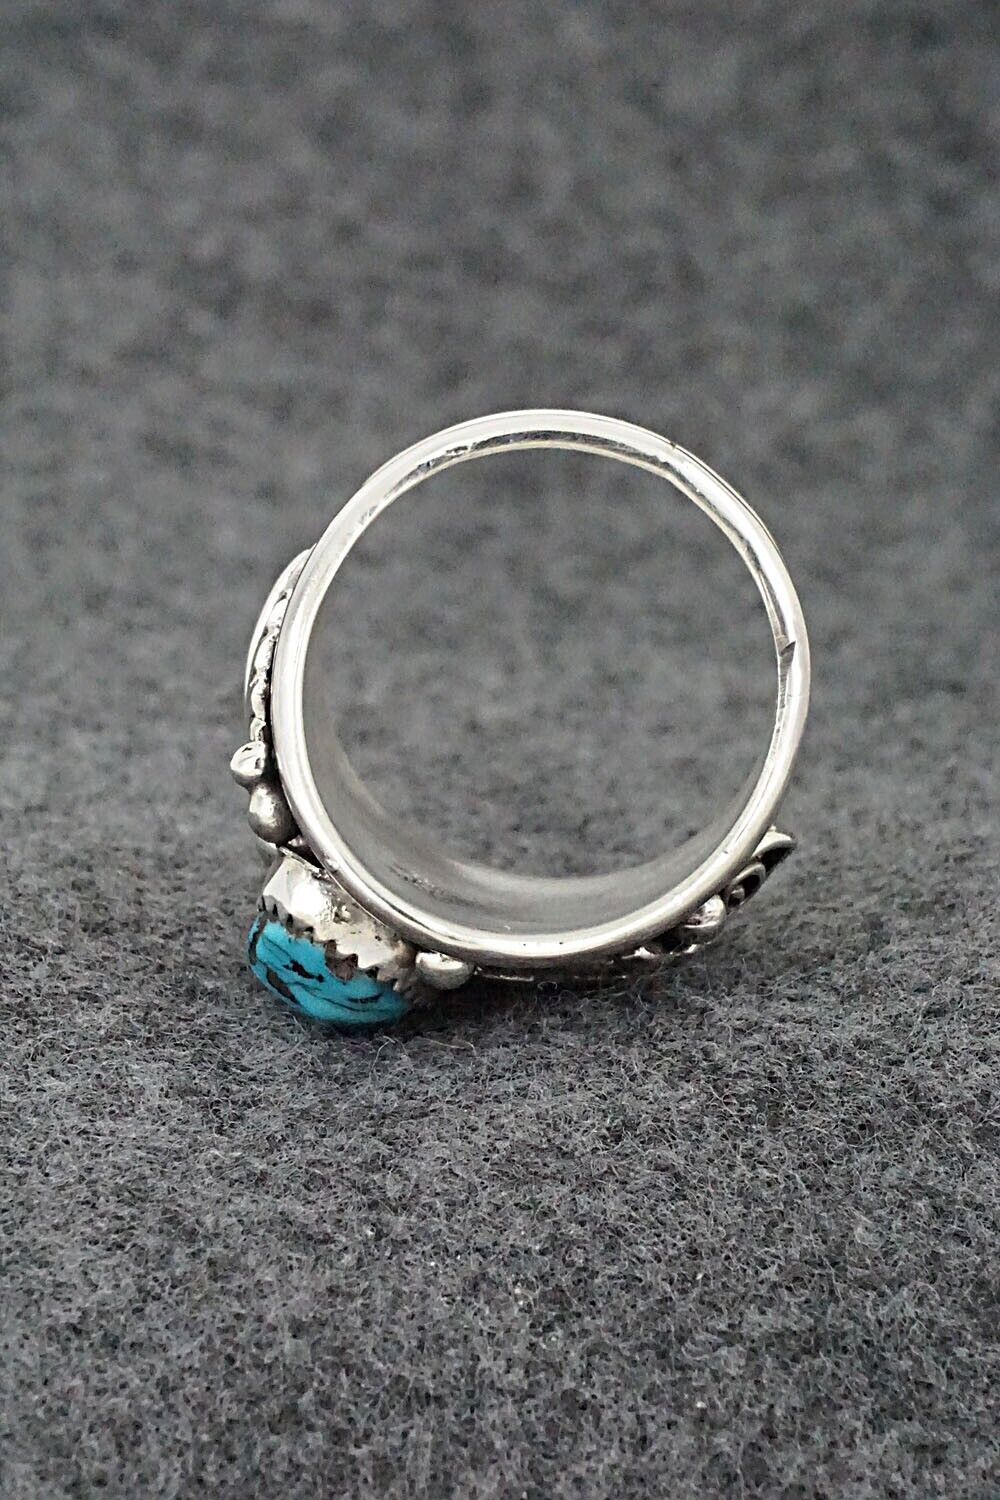 Turquoise, Coral & Sterling Silver Ring - Jeannette Saunders - Size 13.25